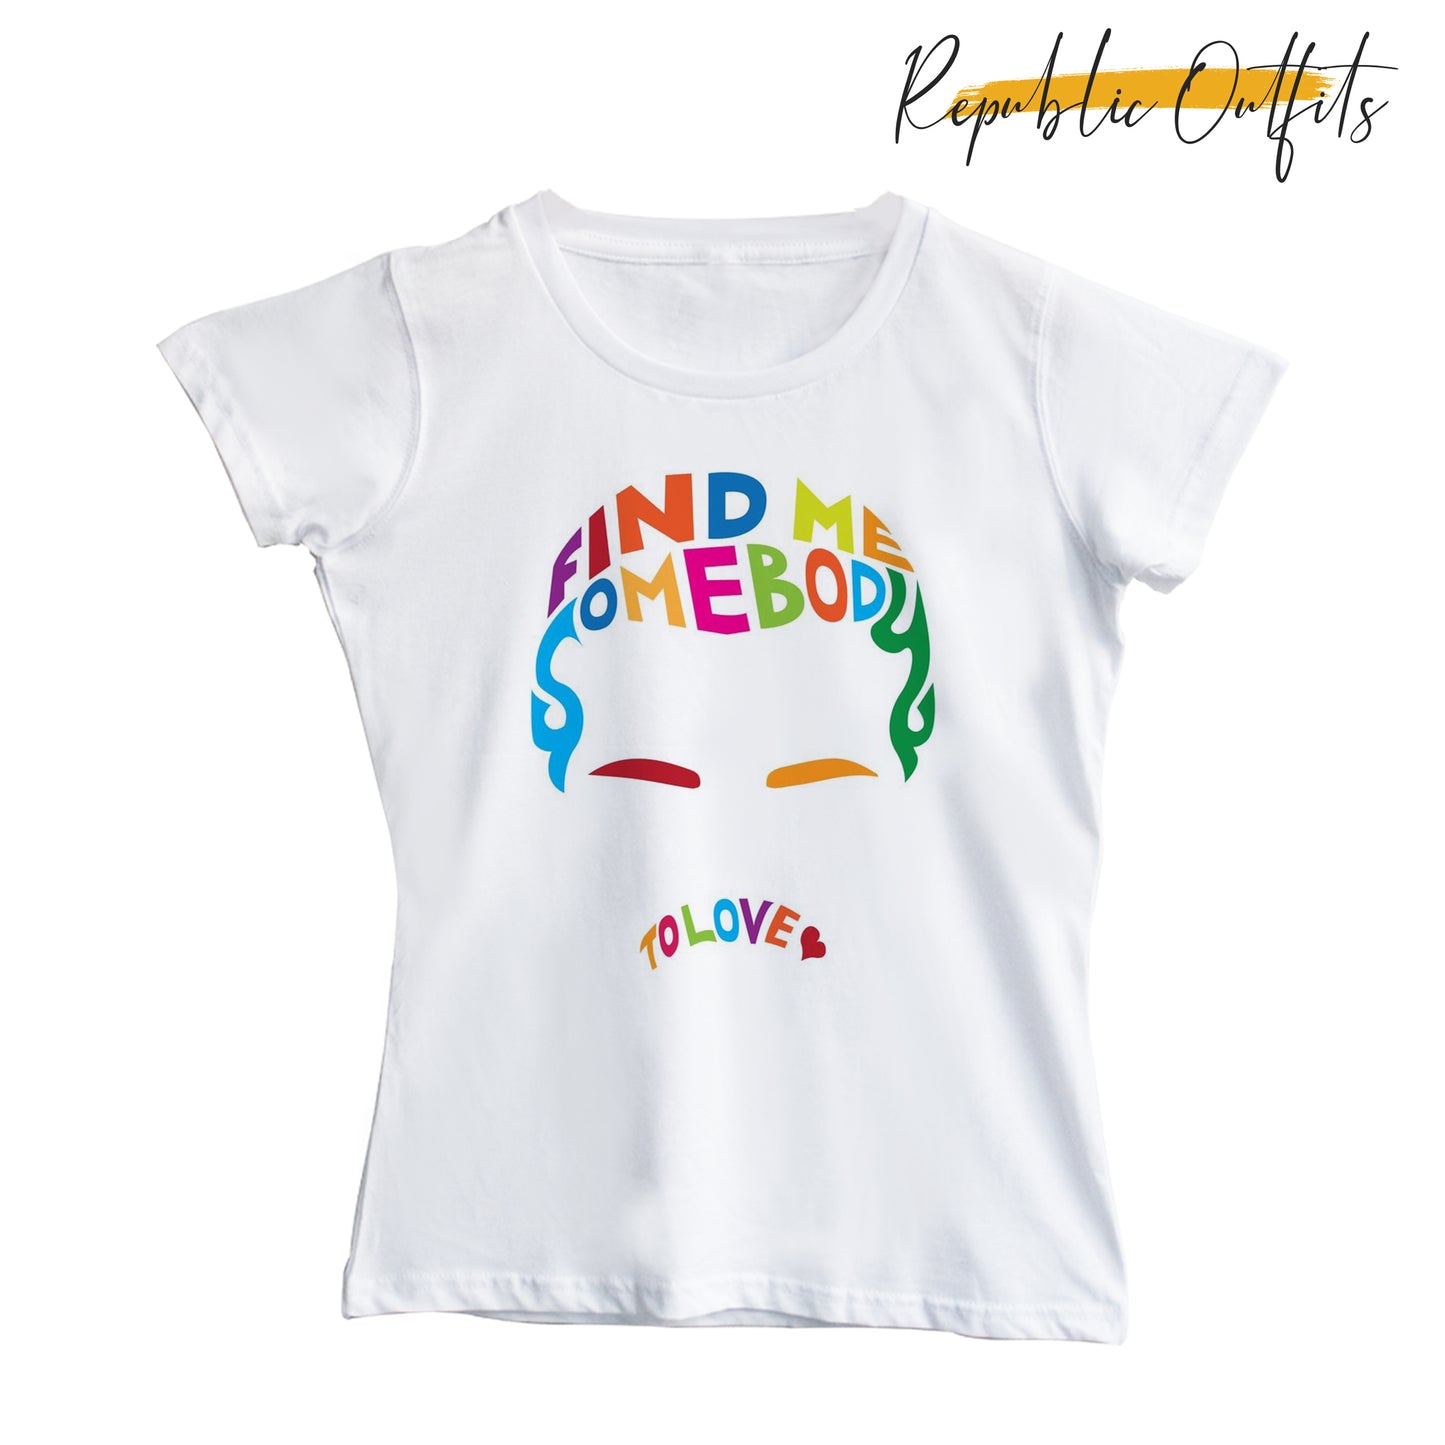 Somebody to love Tee